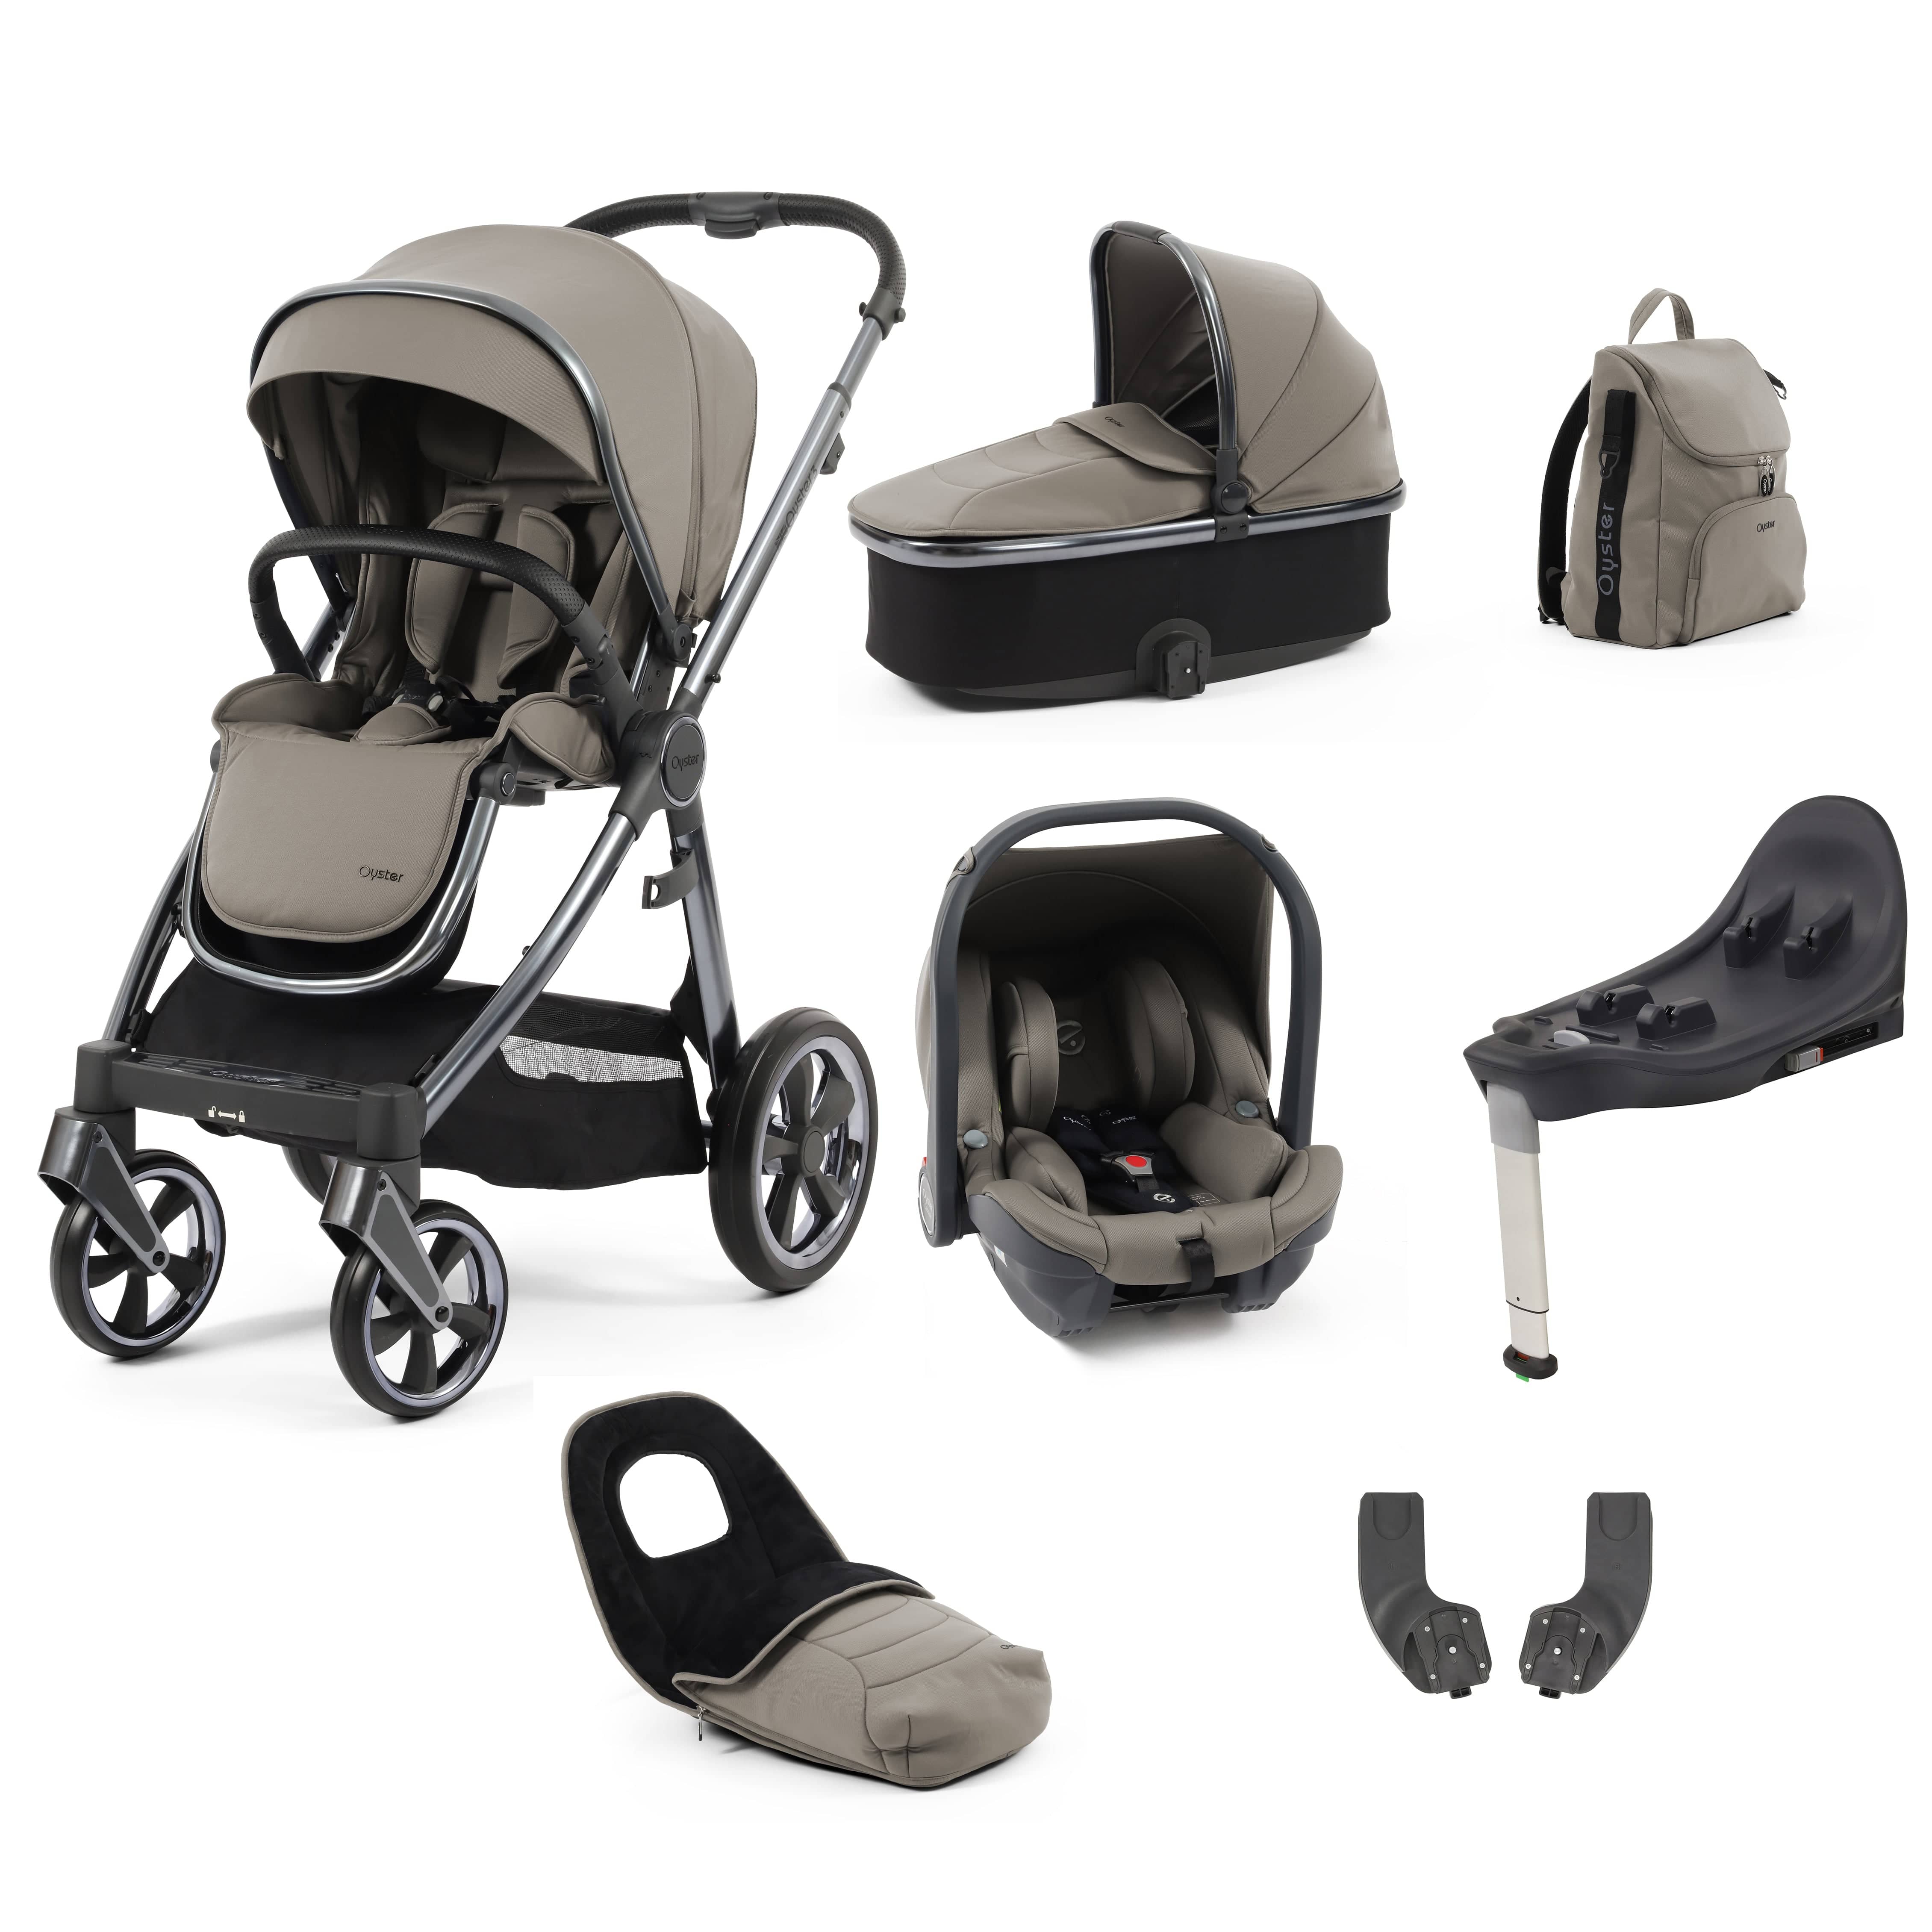 Babystyle Oyster 3 Luxury 7 Piece with Car Seat Bundle in Stone Travel Systems 14776-STN 5060711567259